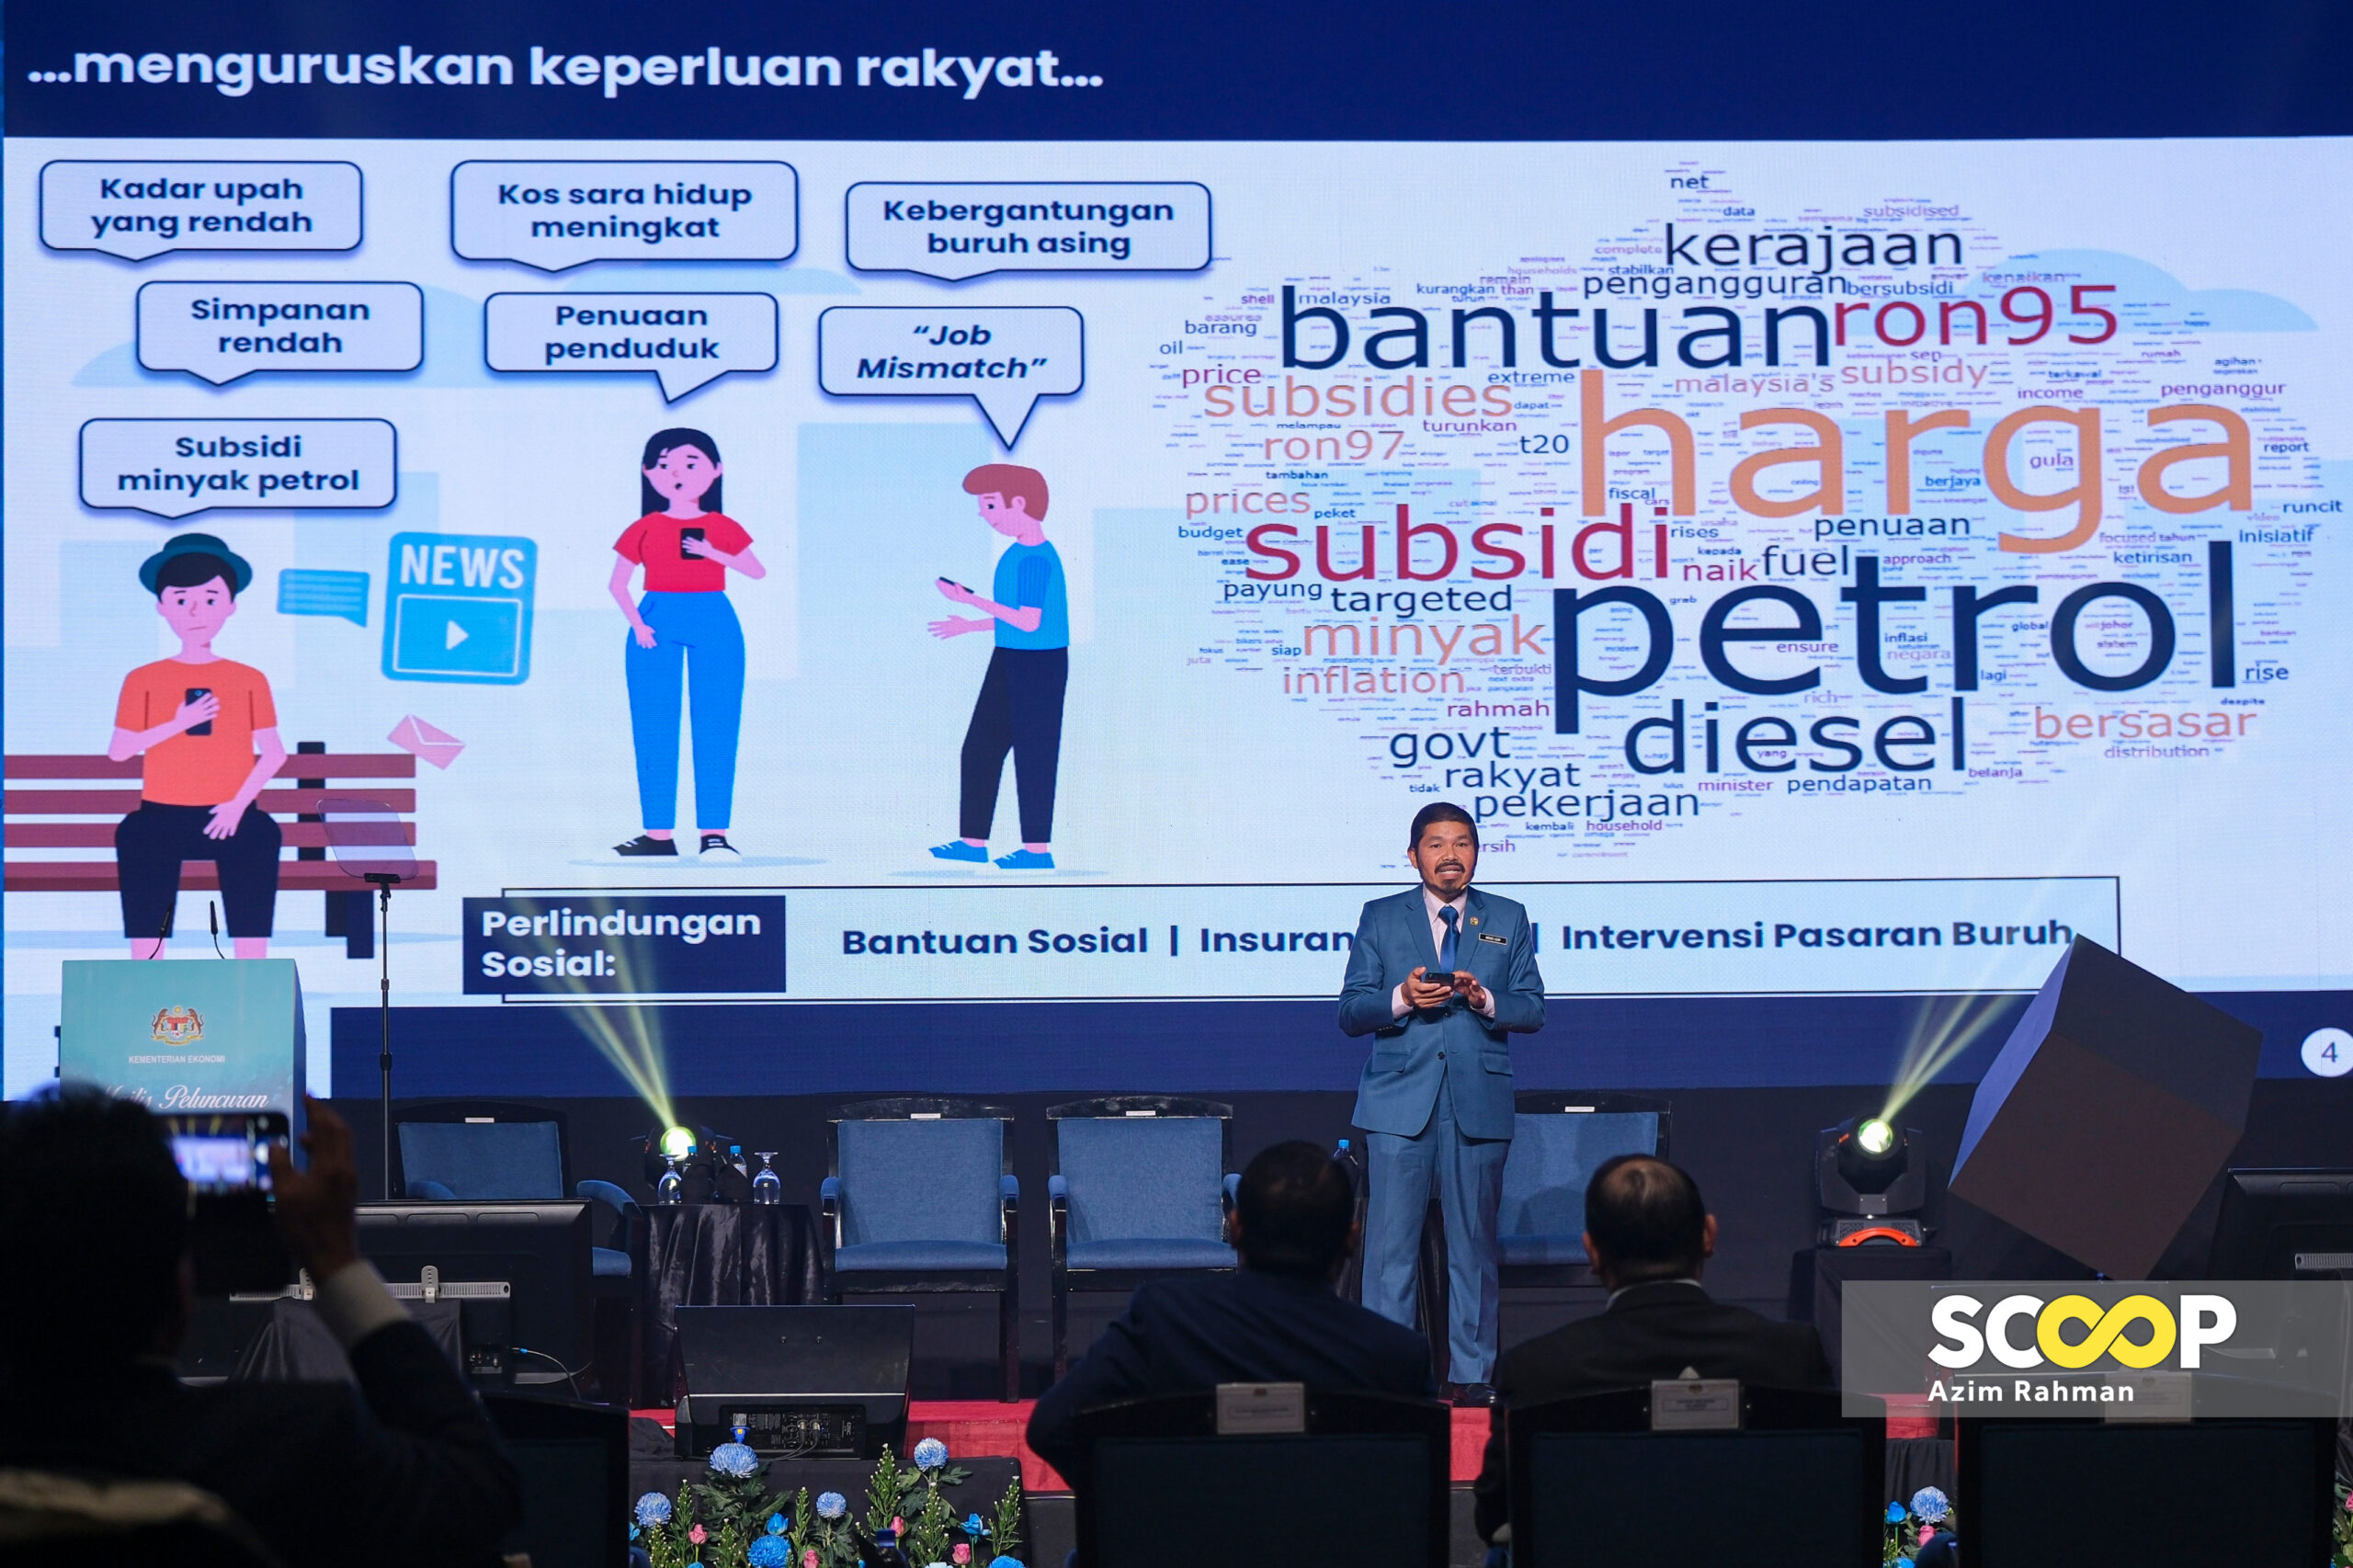 Padu’s success depends on data authenticity, accuracy: chief statistician